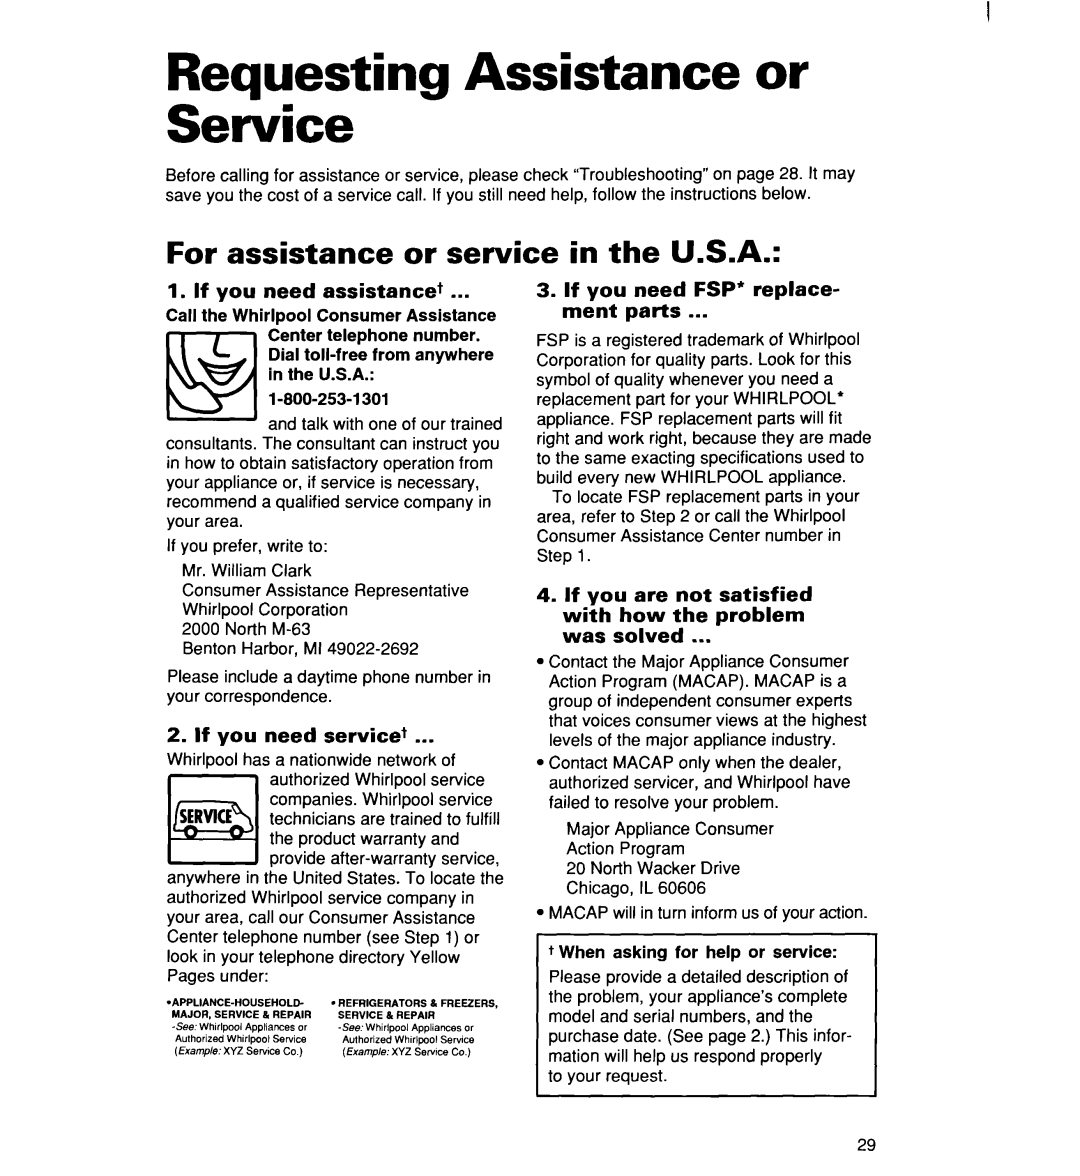 Whirlpool 2194182 Requesting Assistance or Service, For assistance or service in the U.S.A, If you need assistance+ 